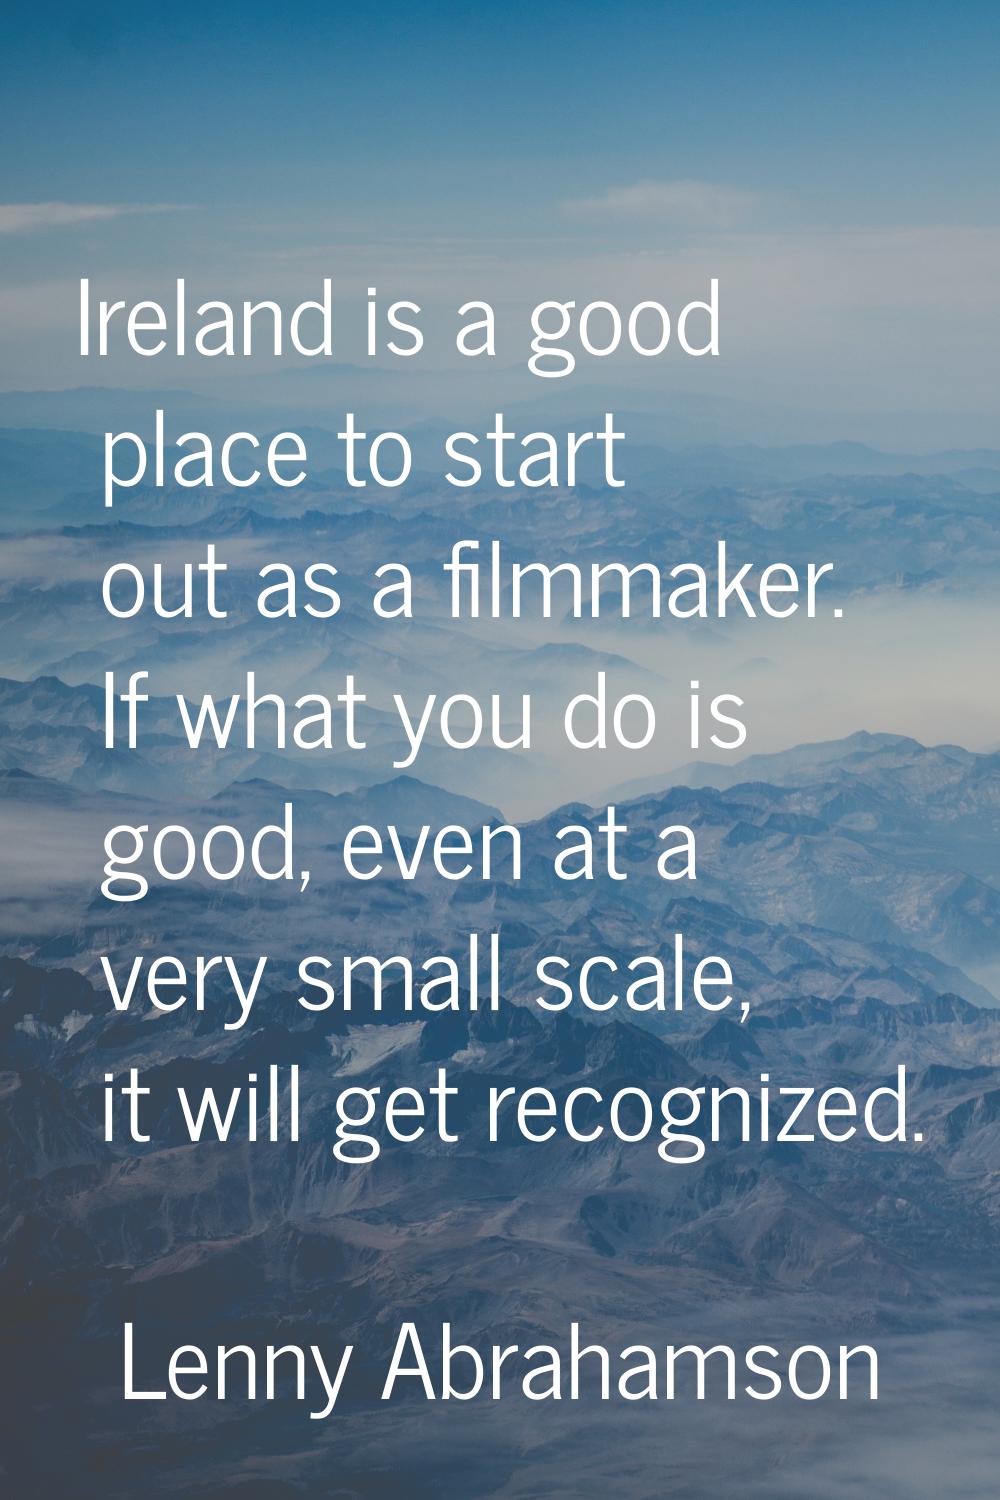 Ireland is a good place to start out as a filmmaker. If what you do is good, even at a very small s